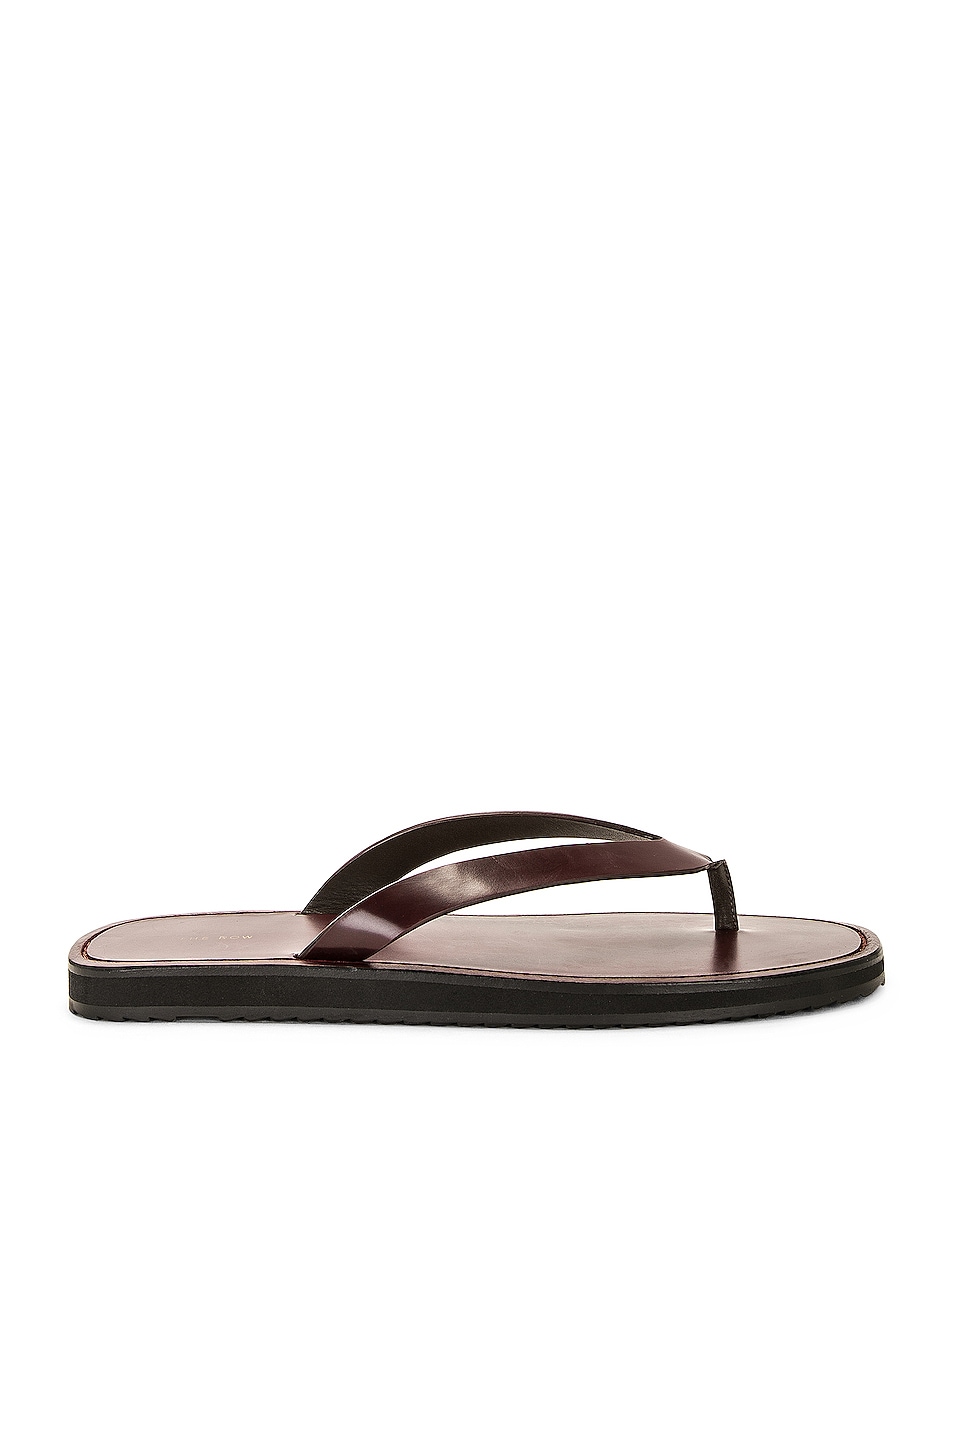 Image 1 of The Row City Flip Flop in Bordeaux